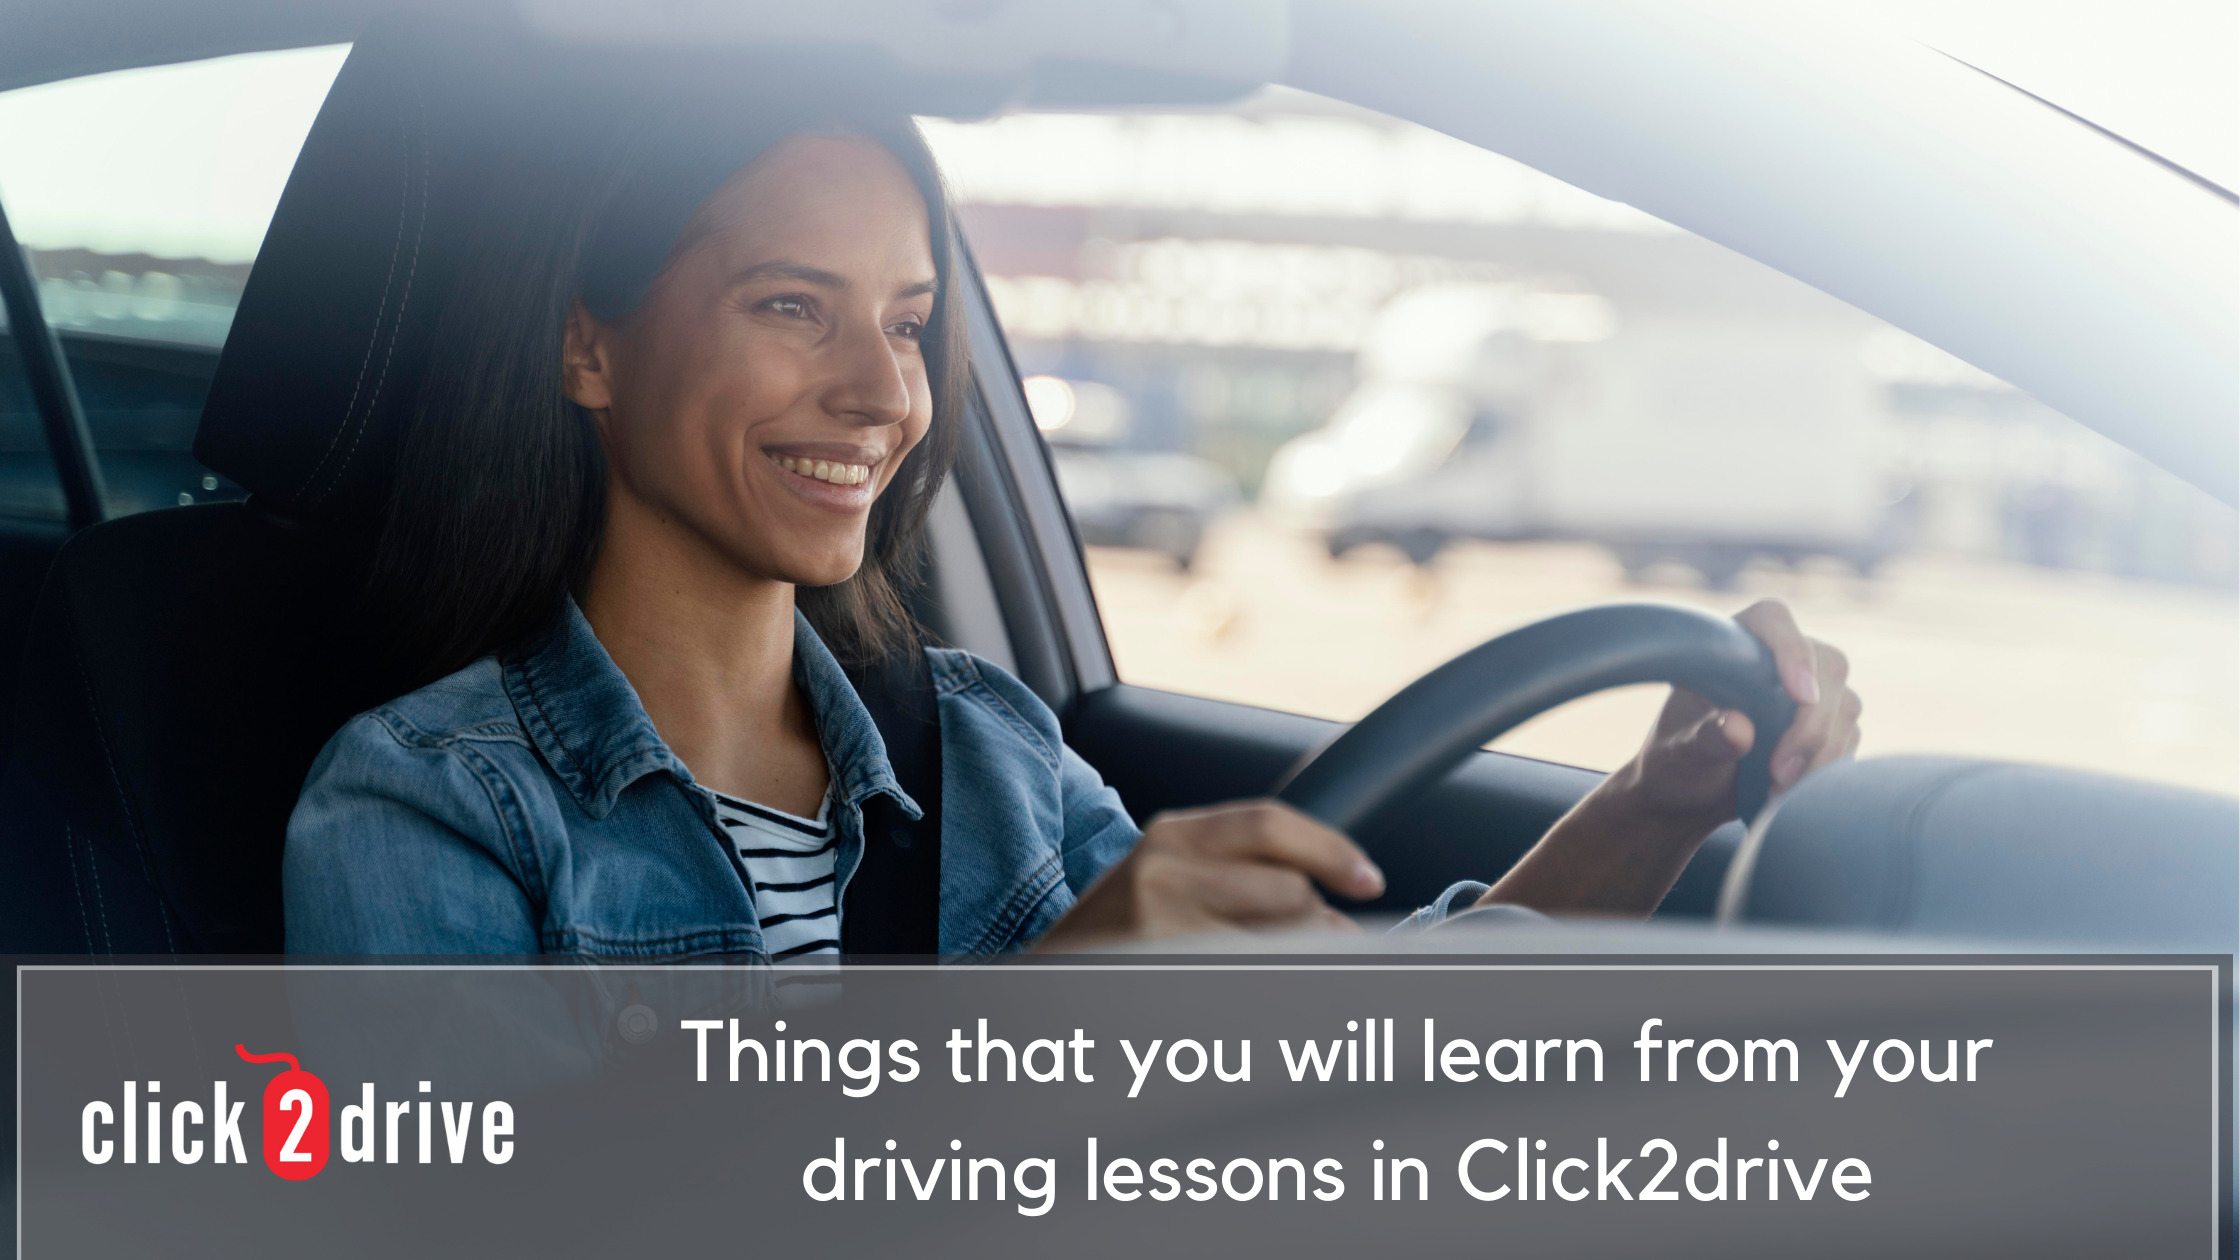 Things that you will learn from your driving lessons in Click2drive